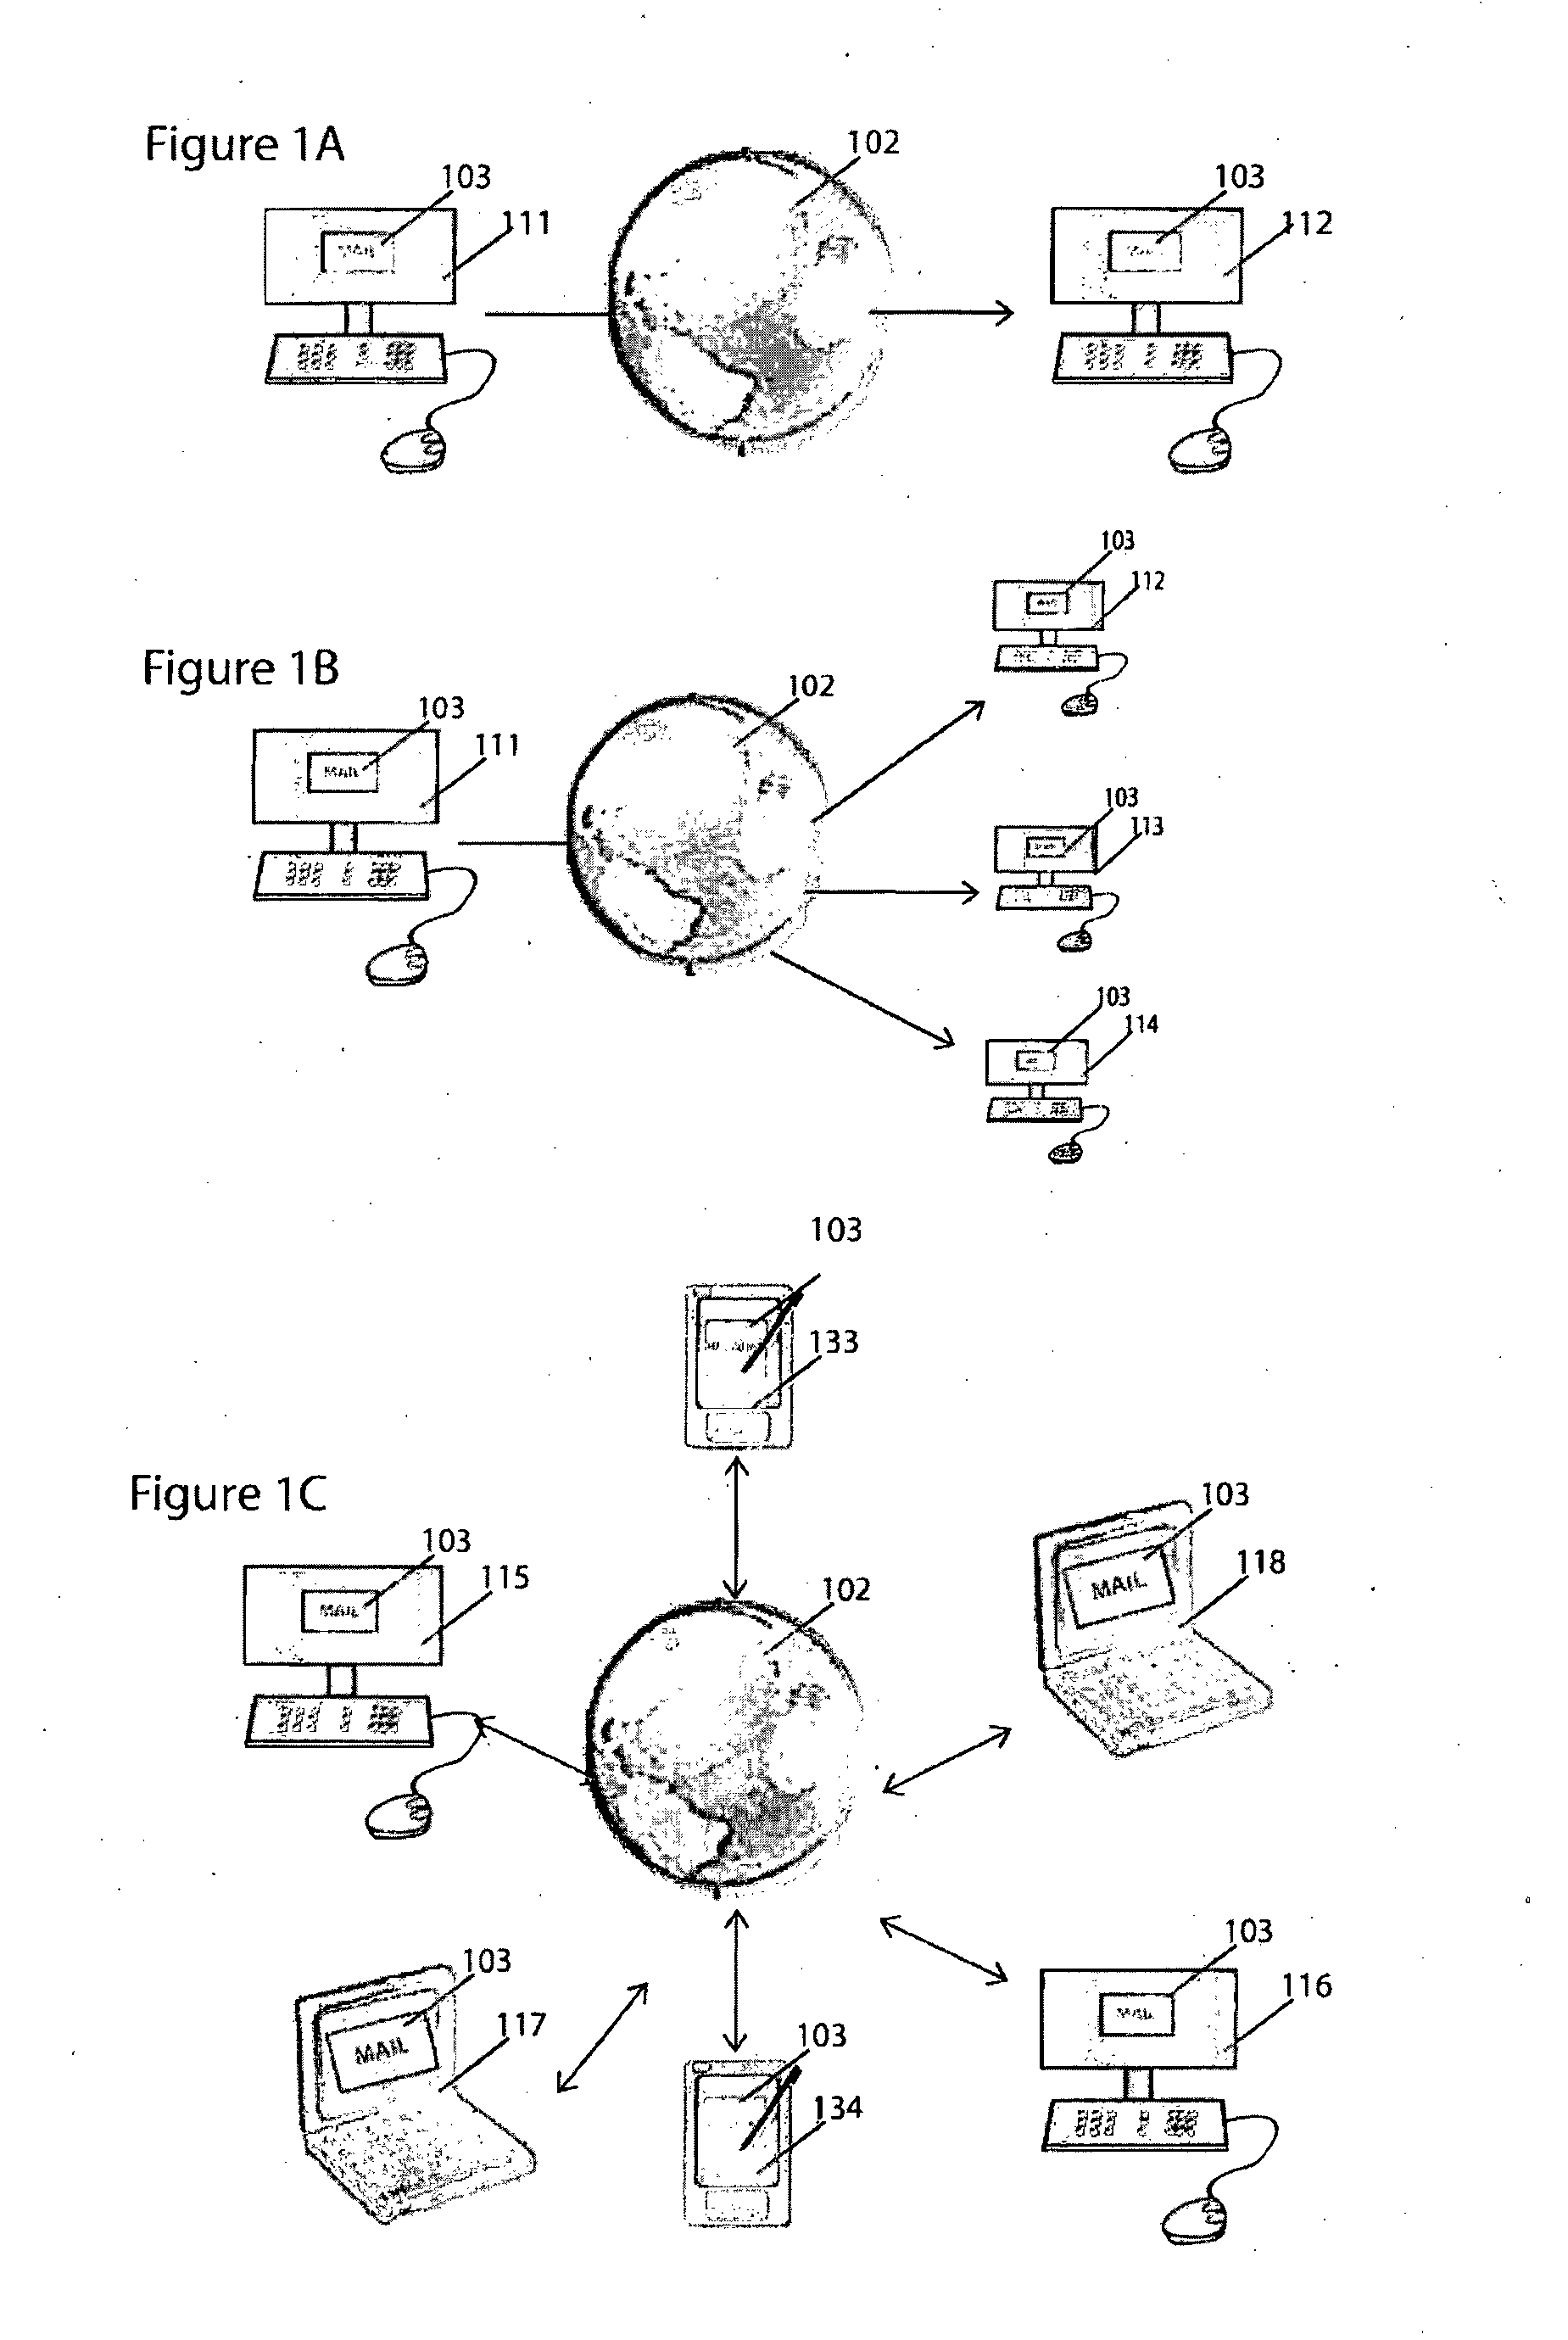 Method, system and apparatus for a communications client program and an associated transfer server for onymous and secure communications